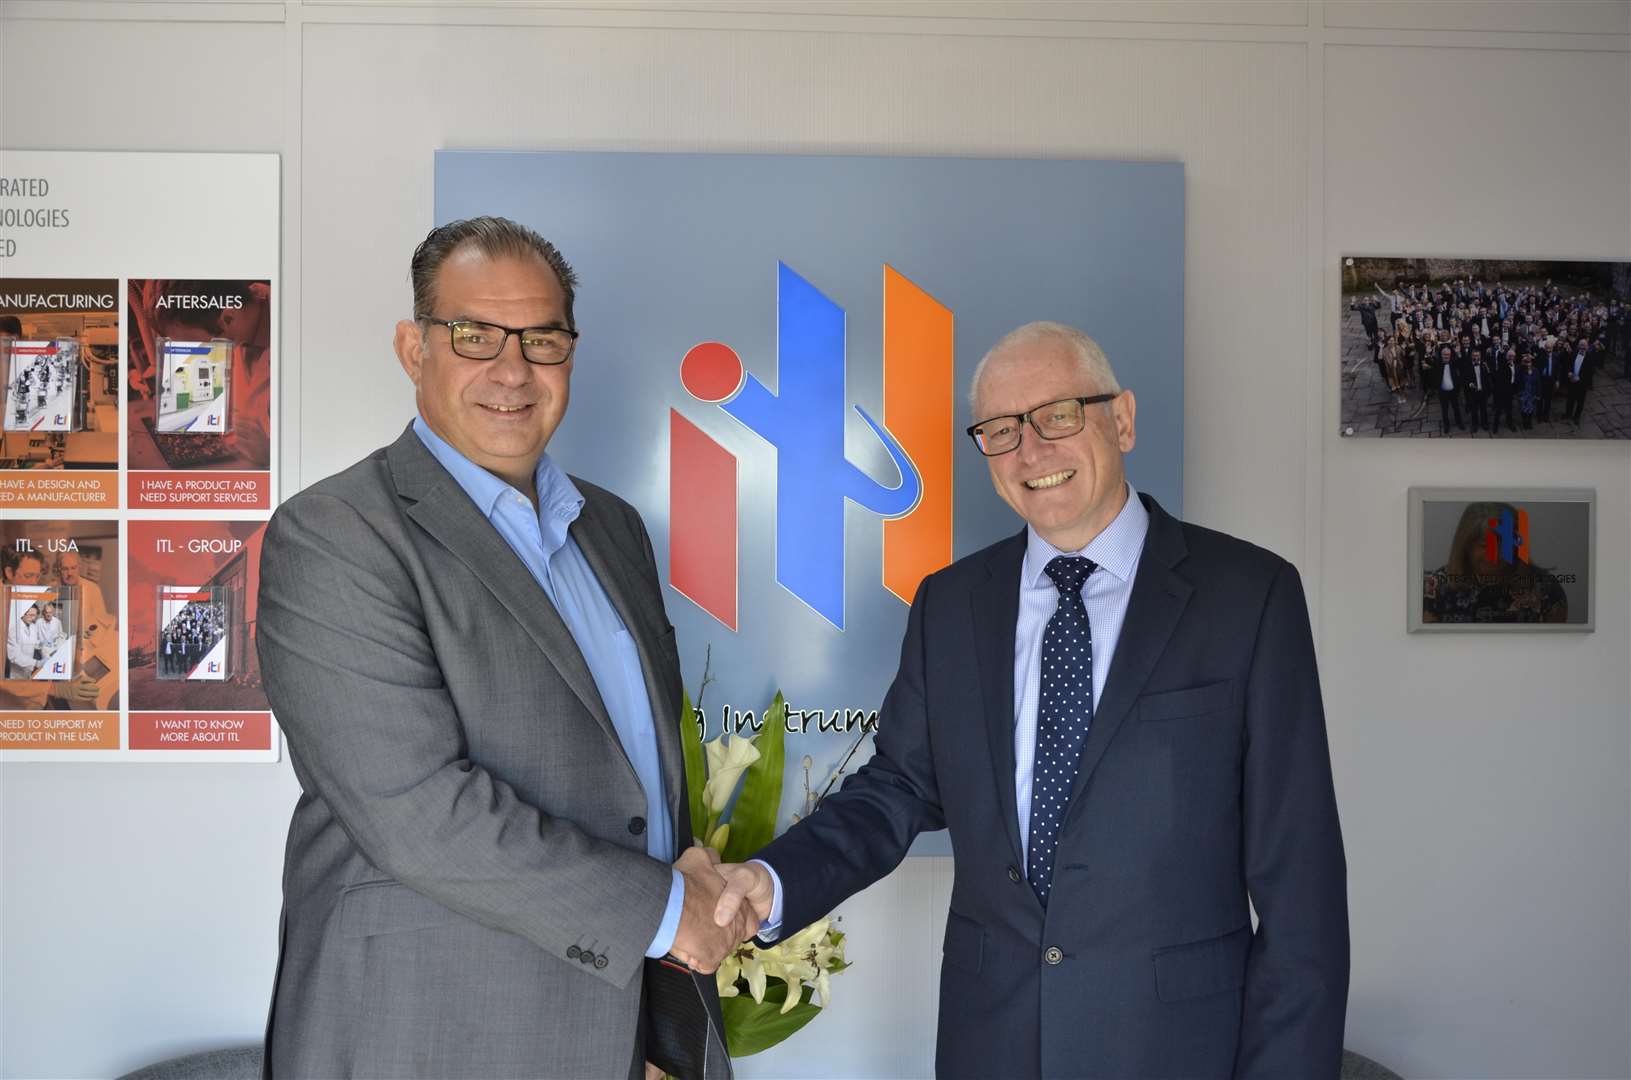 Alex Warnock, chief operating officer of G&H, is pictured with Tom Cole, MD of the ITL Group